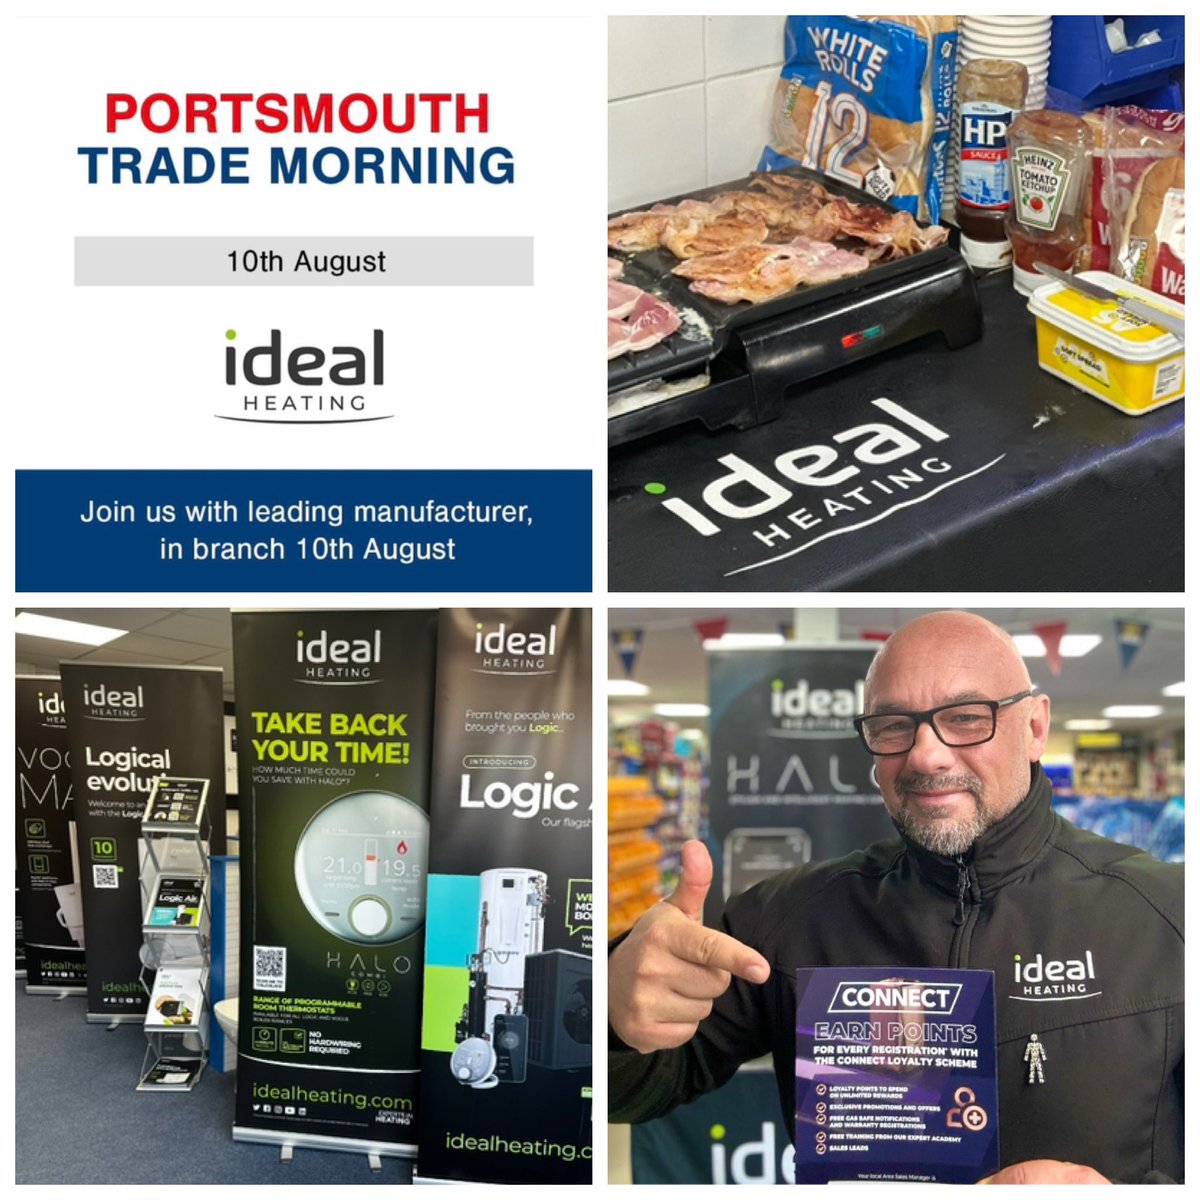 Busy morning with team Williams Trade Supplies Ltd Portsmouth ❤️👍✅
#TalkingProduct 
#supportinglocalbusiness 
@idealheating @Williams_Co